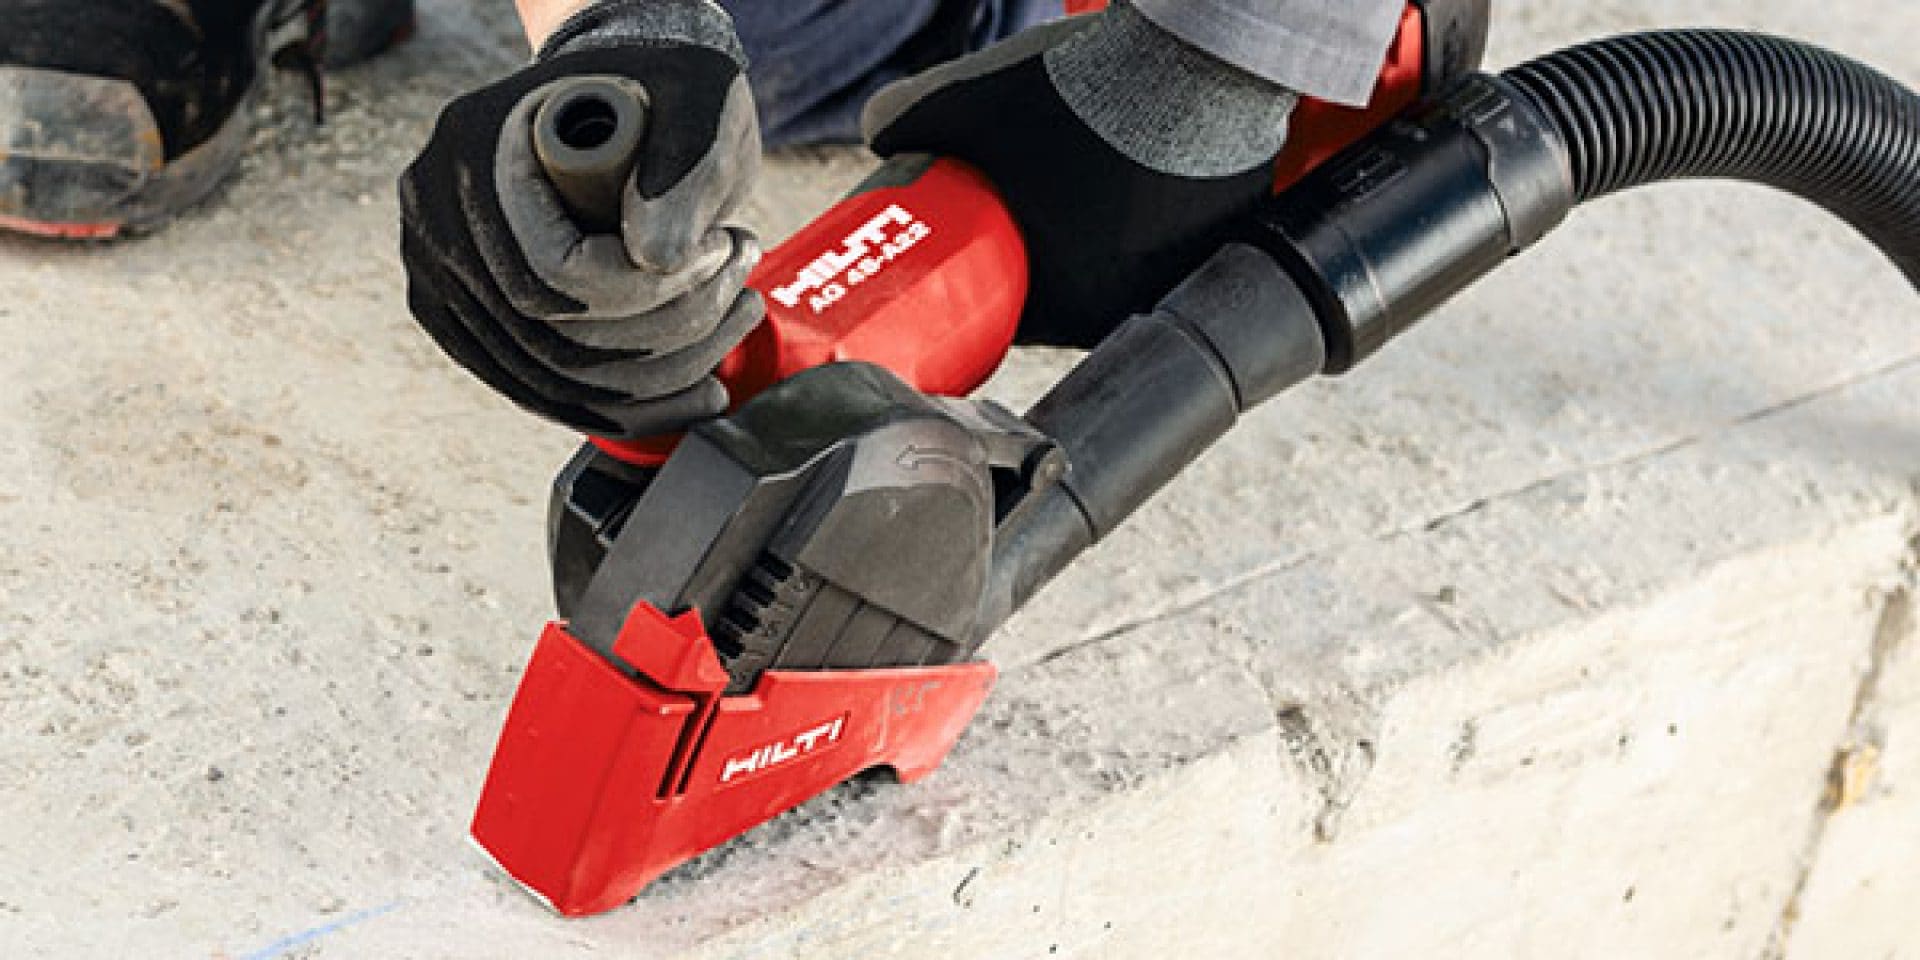 The AG 4S-A22 includes a fast blade stop which contributes to job site safety